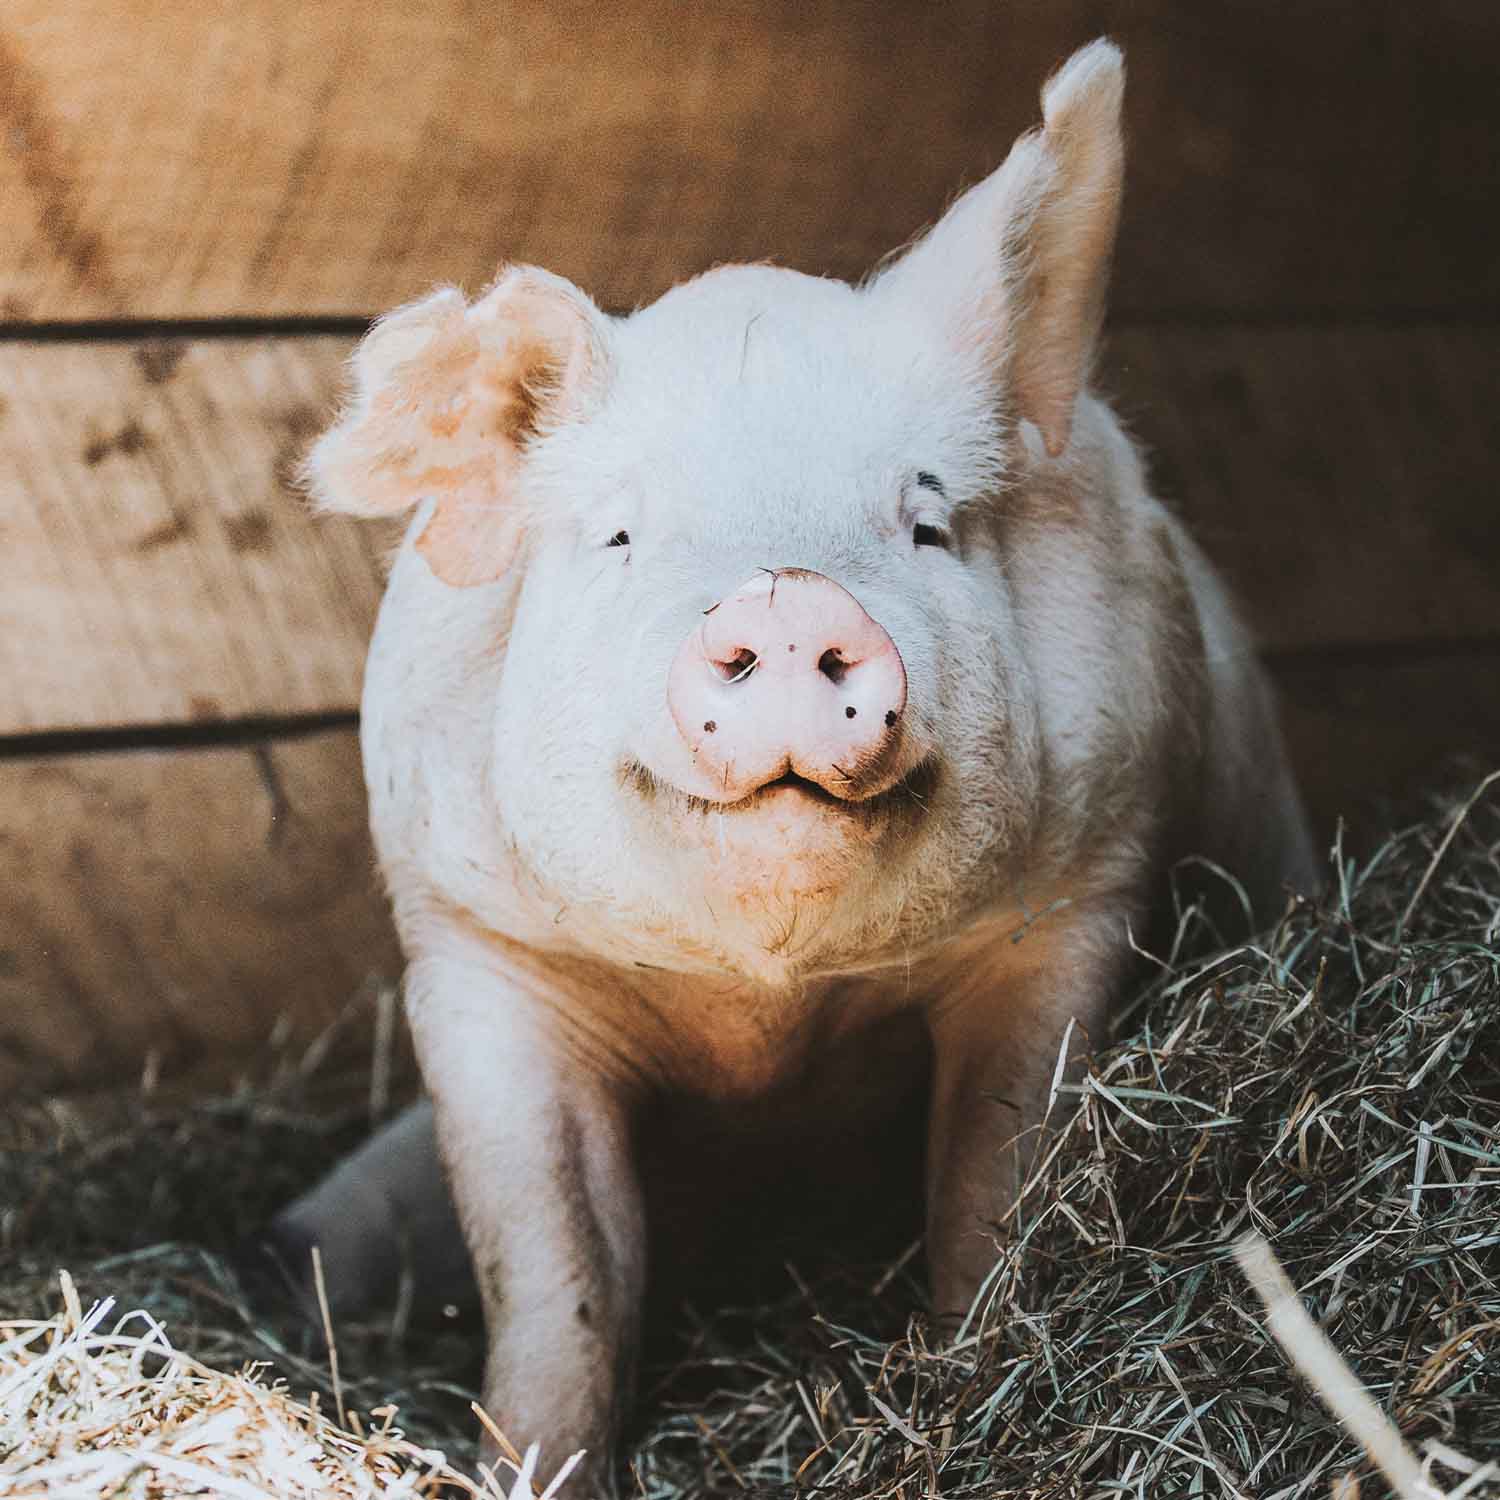 Rescued pig in a sanctuary